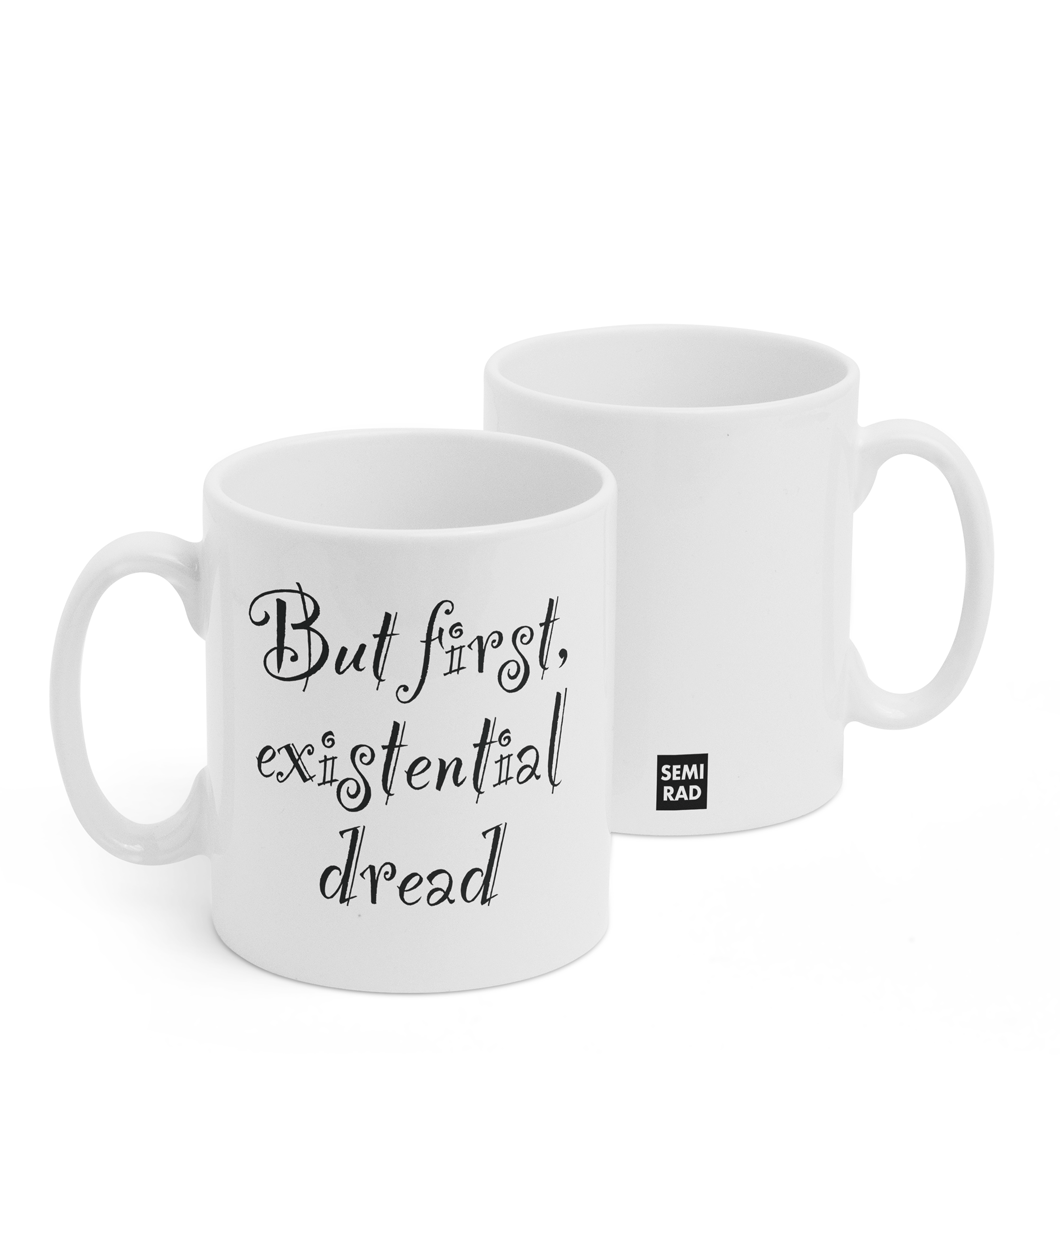 Two white mugs sitting next to each other showing two sides of the same mug. The front side has text that reads 